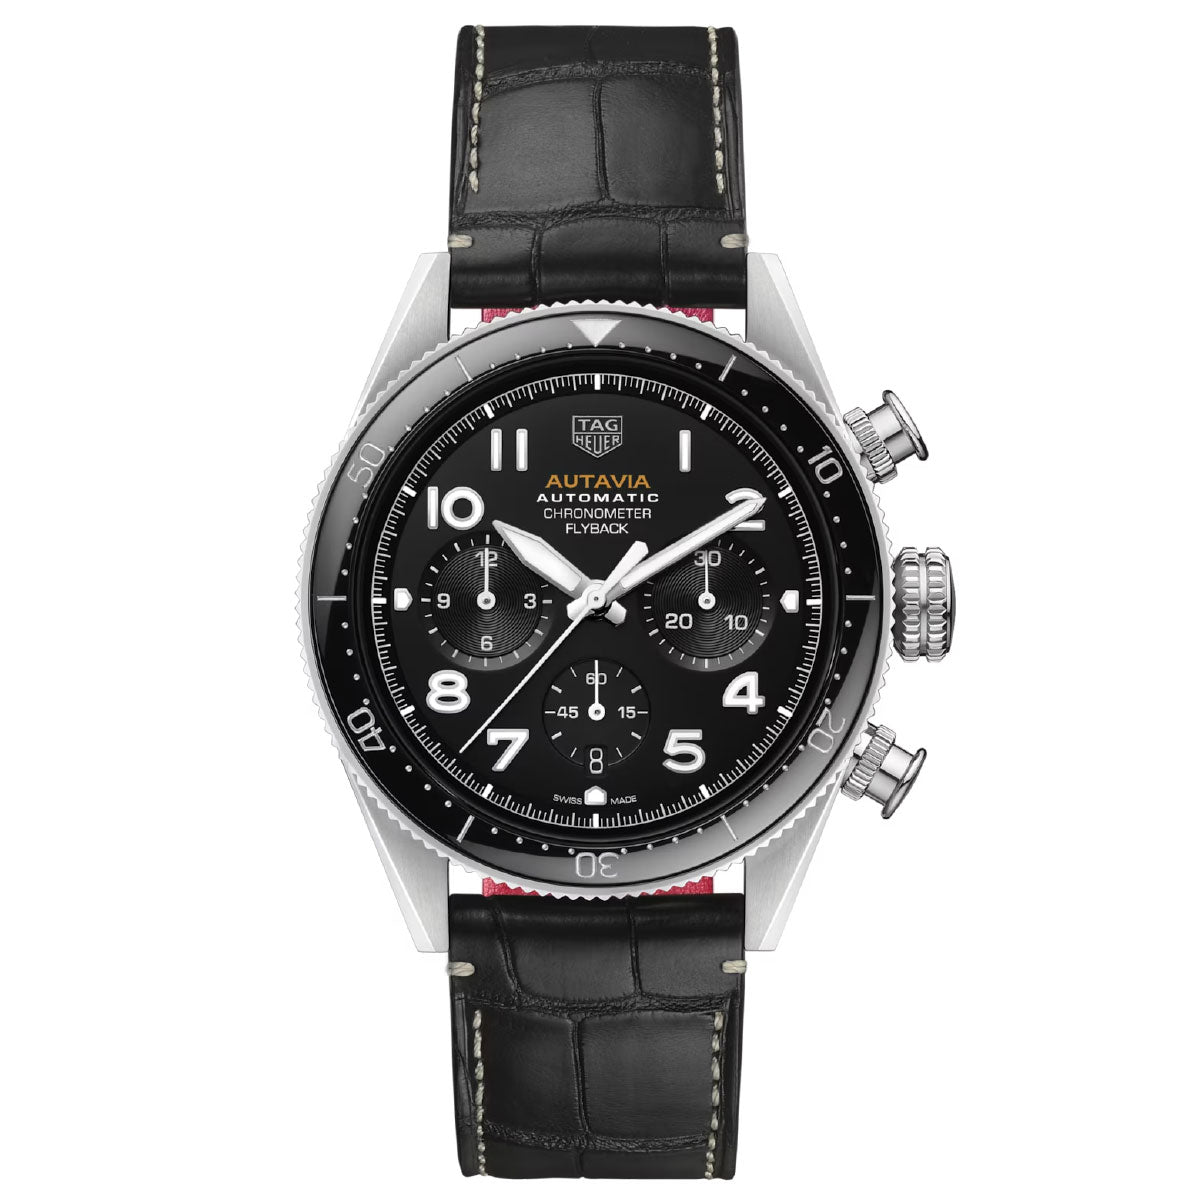 TAG Heuer Autavia Chronometer Flyback Calibre HEUER02 COSC Automatic Chronograph 42mm Watch